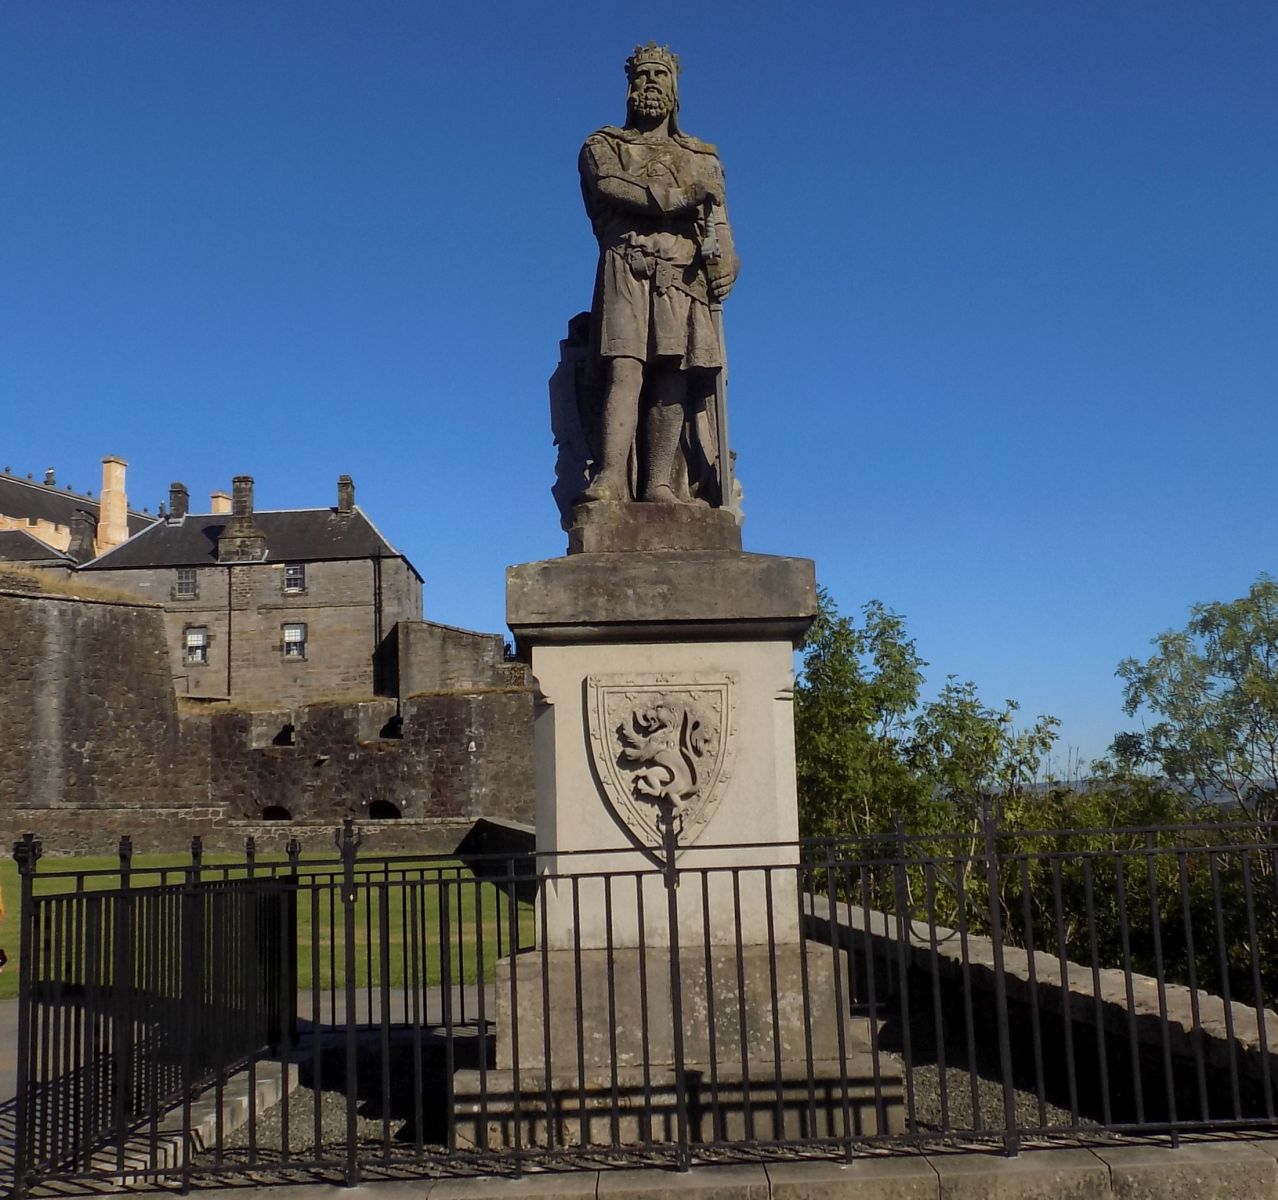 Robert the Bruce statue on the esplanade of Stirling Castle